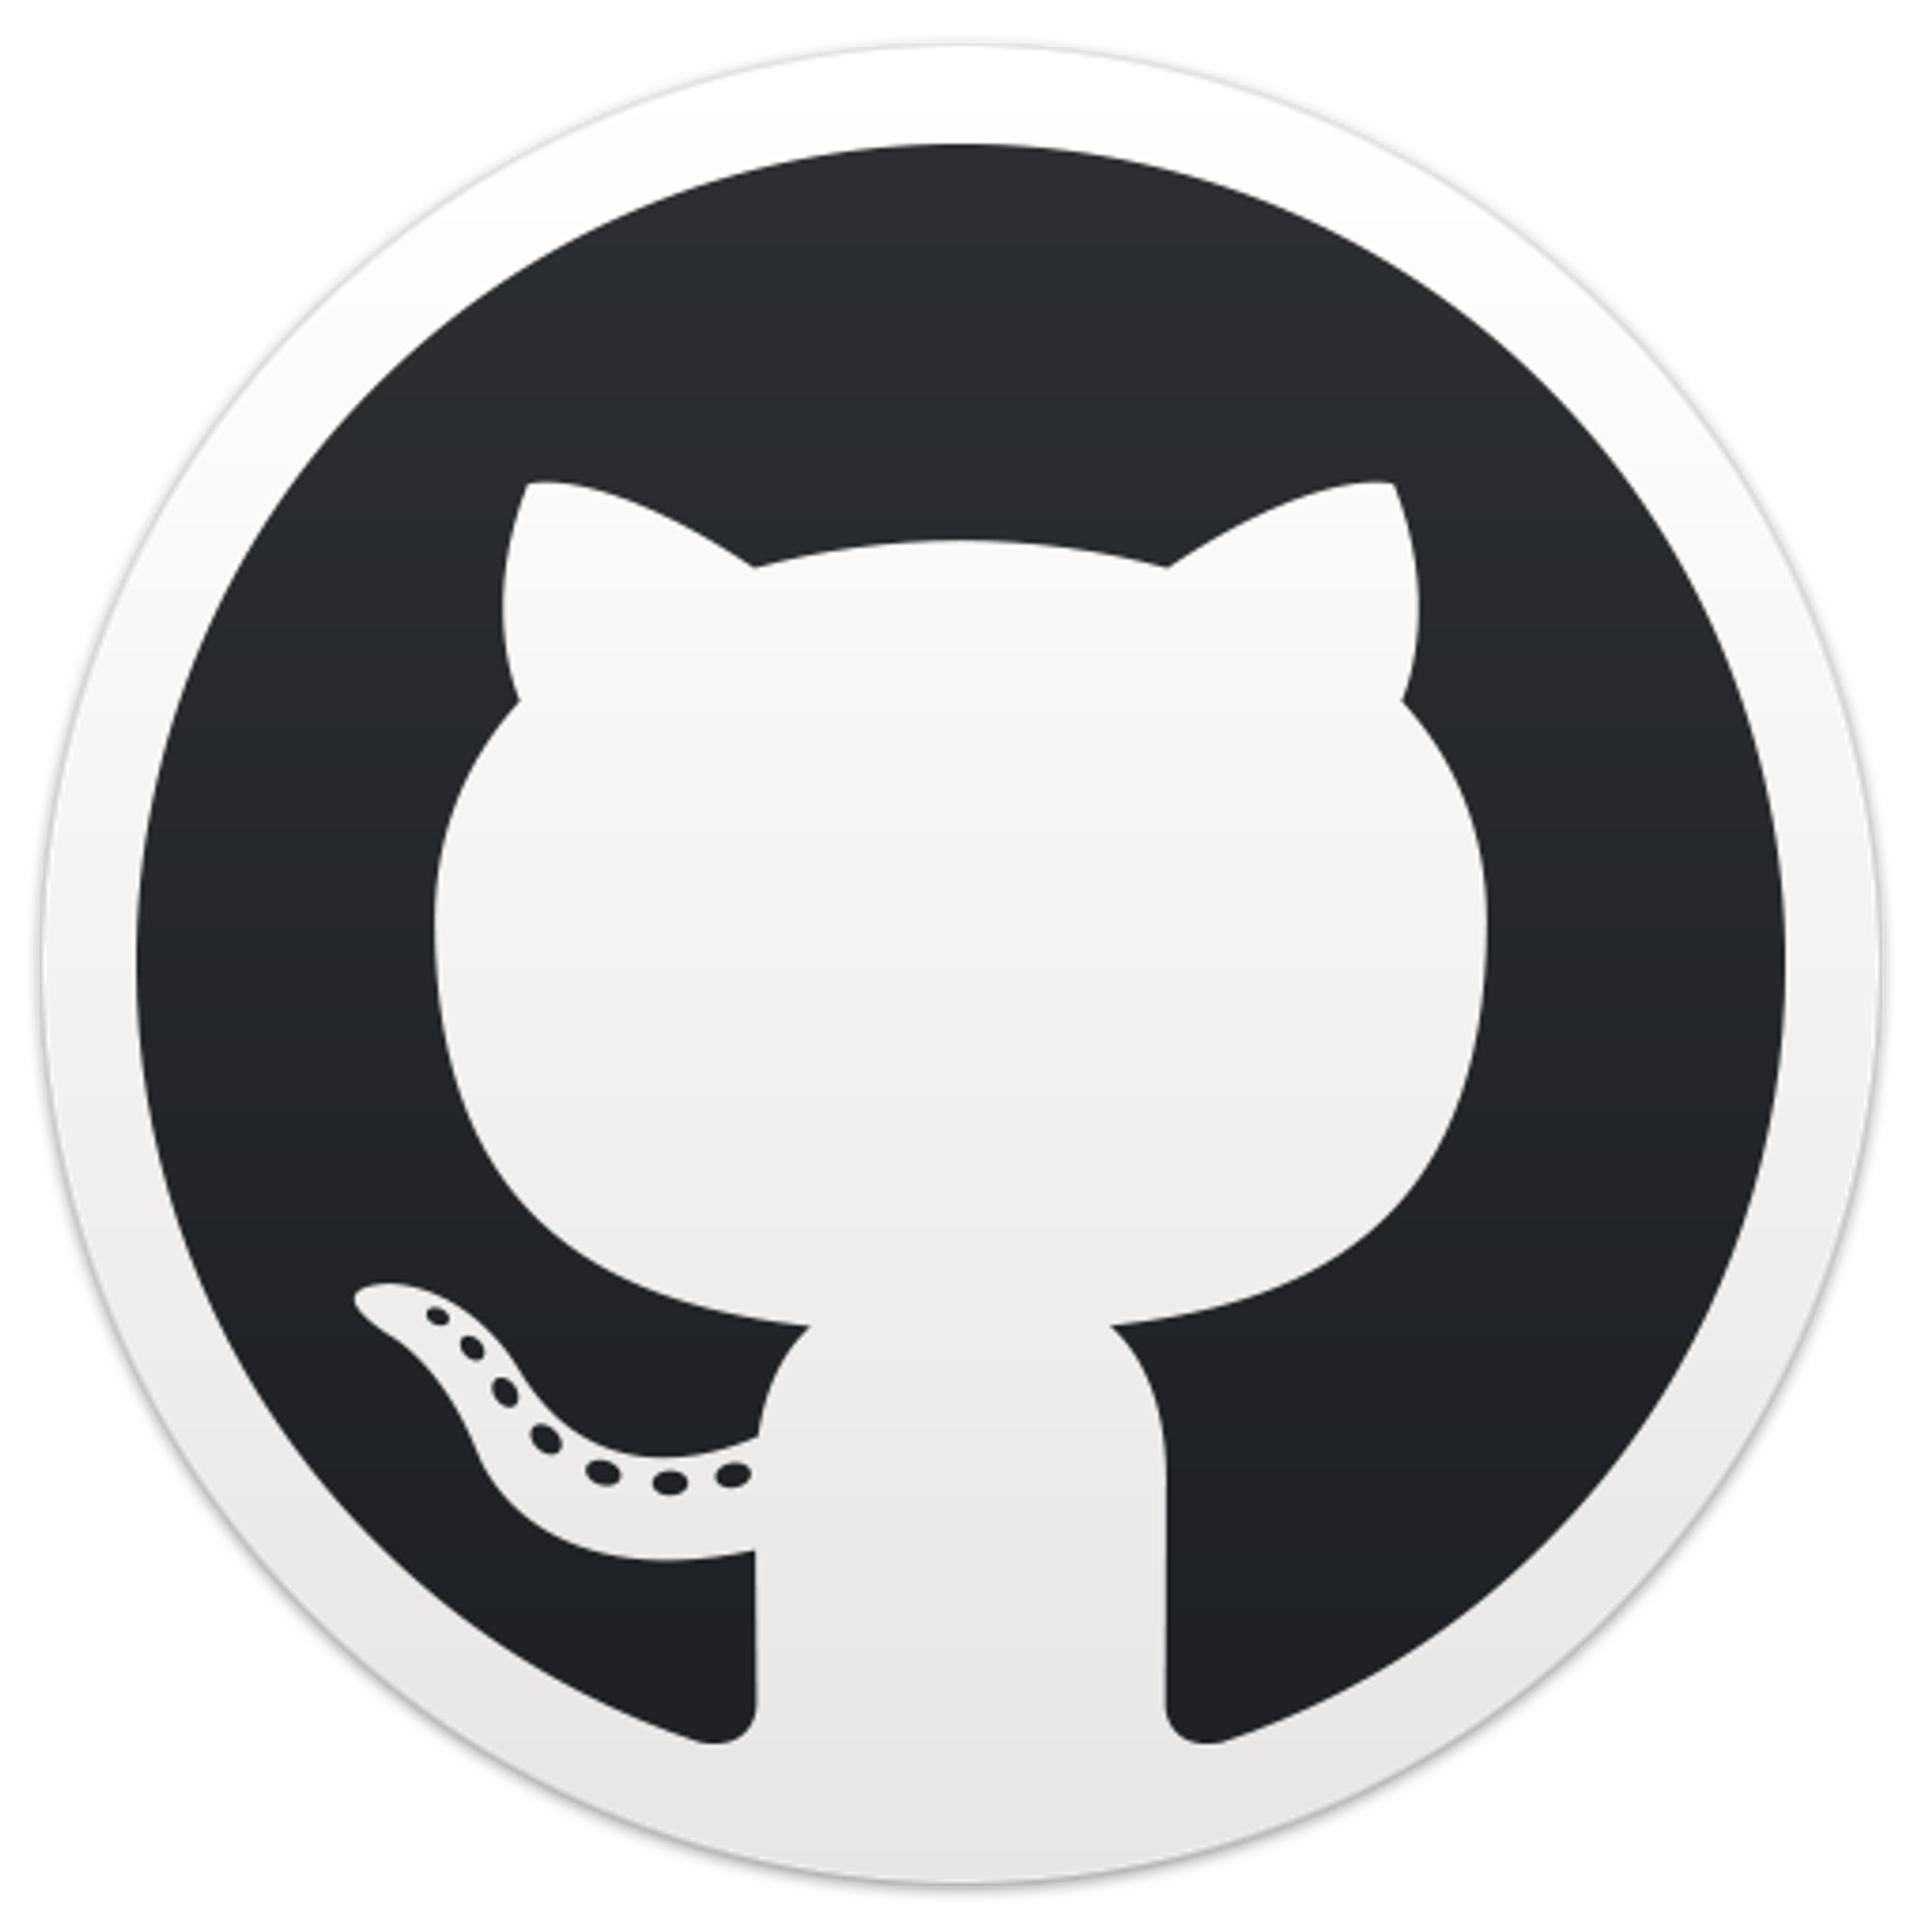 GitHub - tc39/proposal-static-class-features: The static parts of new class features, in a separate proposal